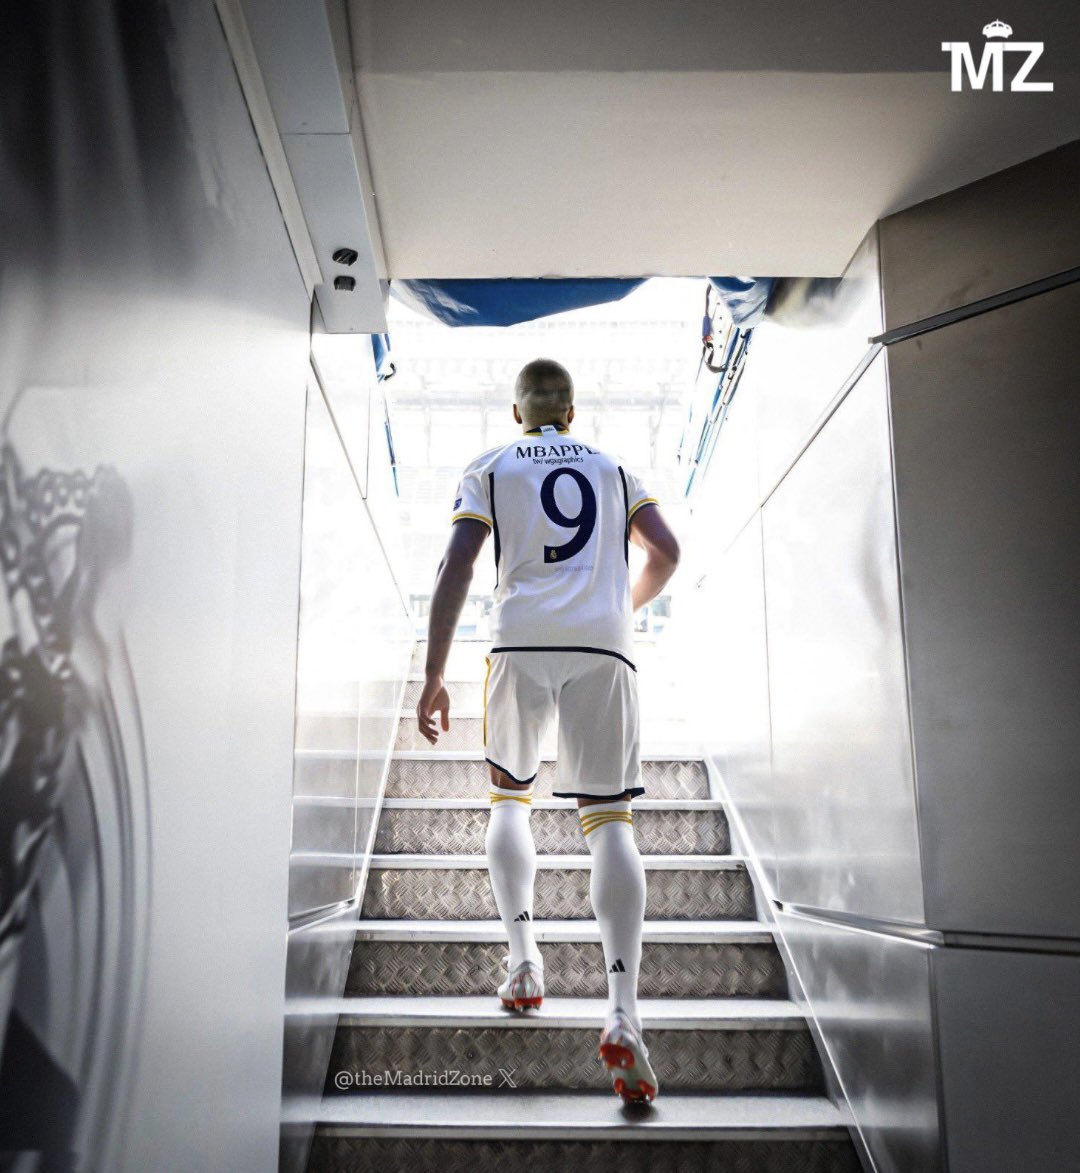 🚨 BREAKING: Real Madrid are preparing a SPECIAL PRESENTATION for Kylian Mbappé at the Santiago Bernabeu. @FabrizioRomano #rmalive